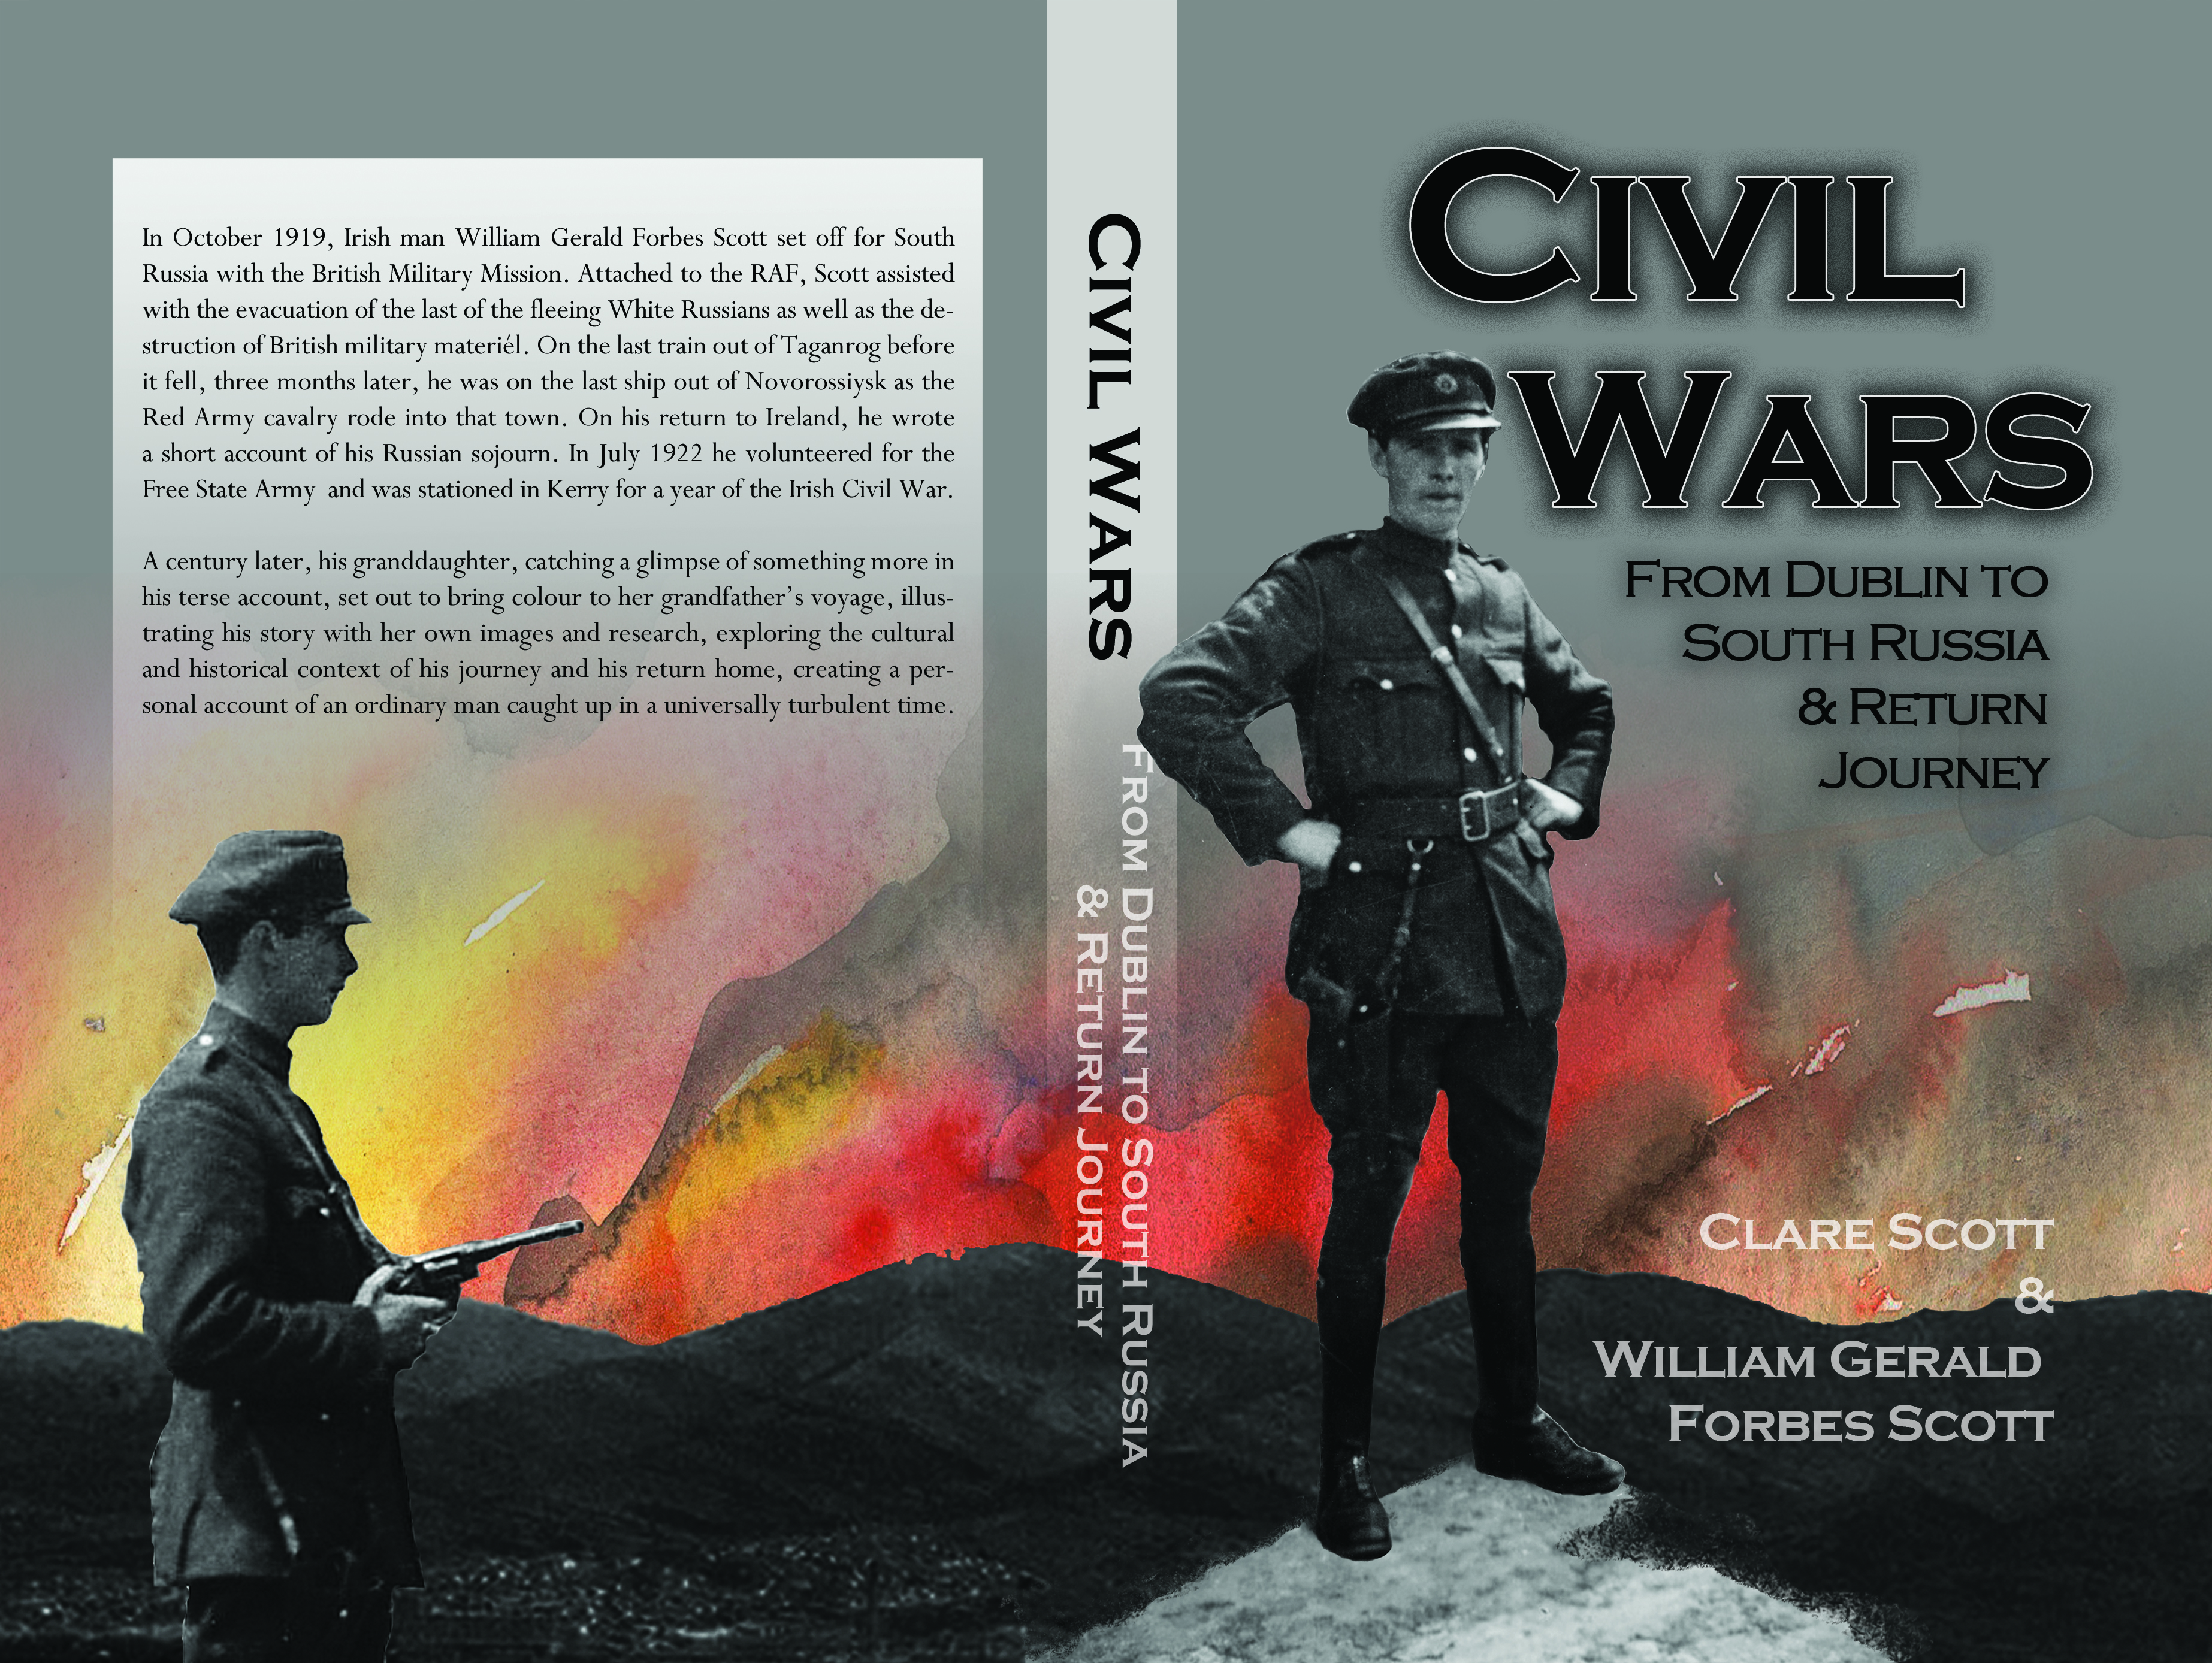 The Book is…HERE! Civil Wars: From Dublin to South Russia & Return Journey